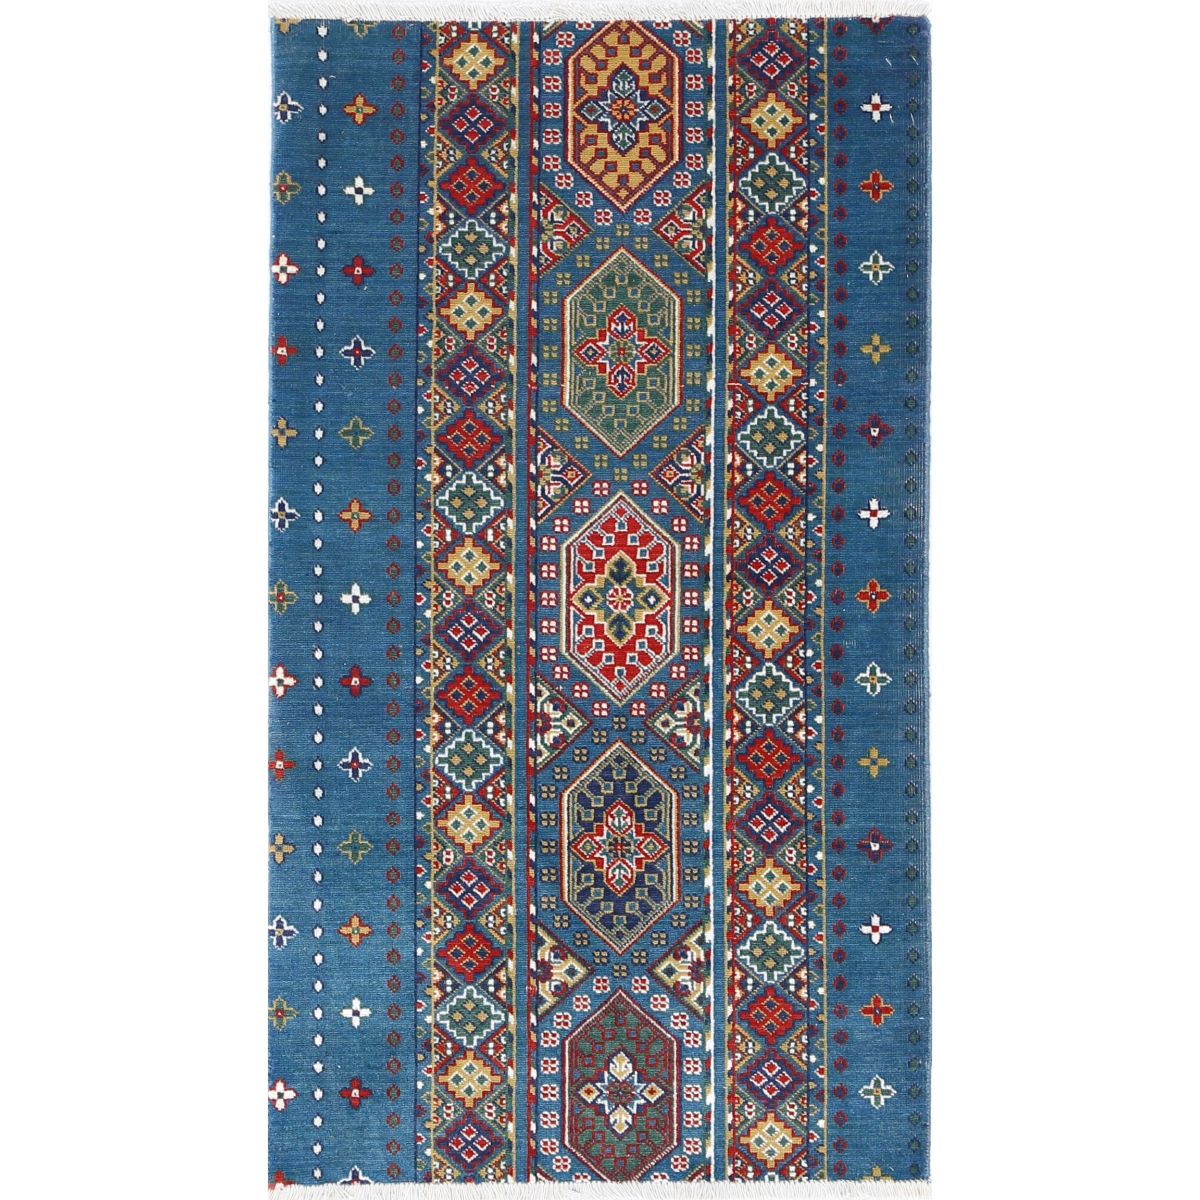 Gulshan Collection Powered Loomed Blue 2'2" X 3'10" Rectangle Gulshan Design Wool Rug